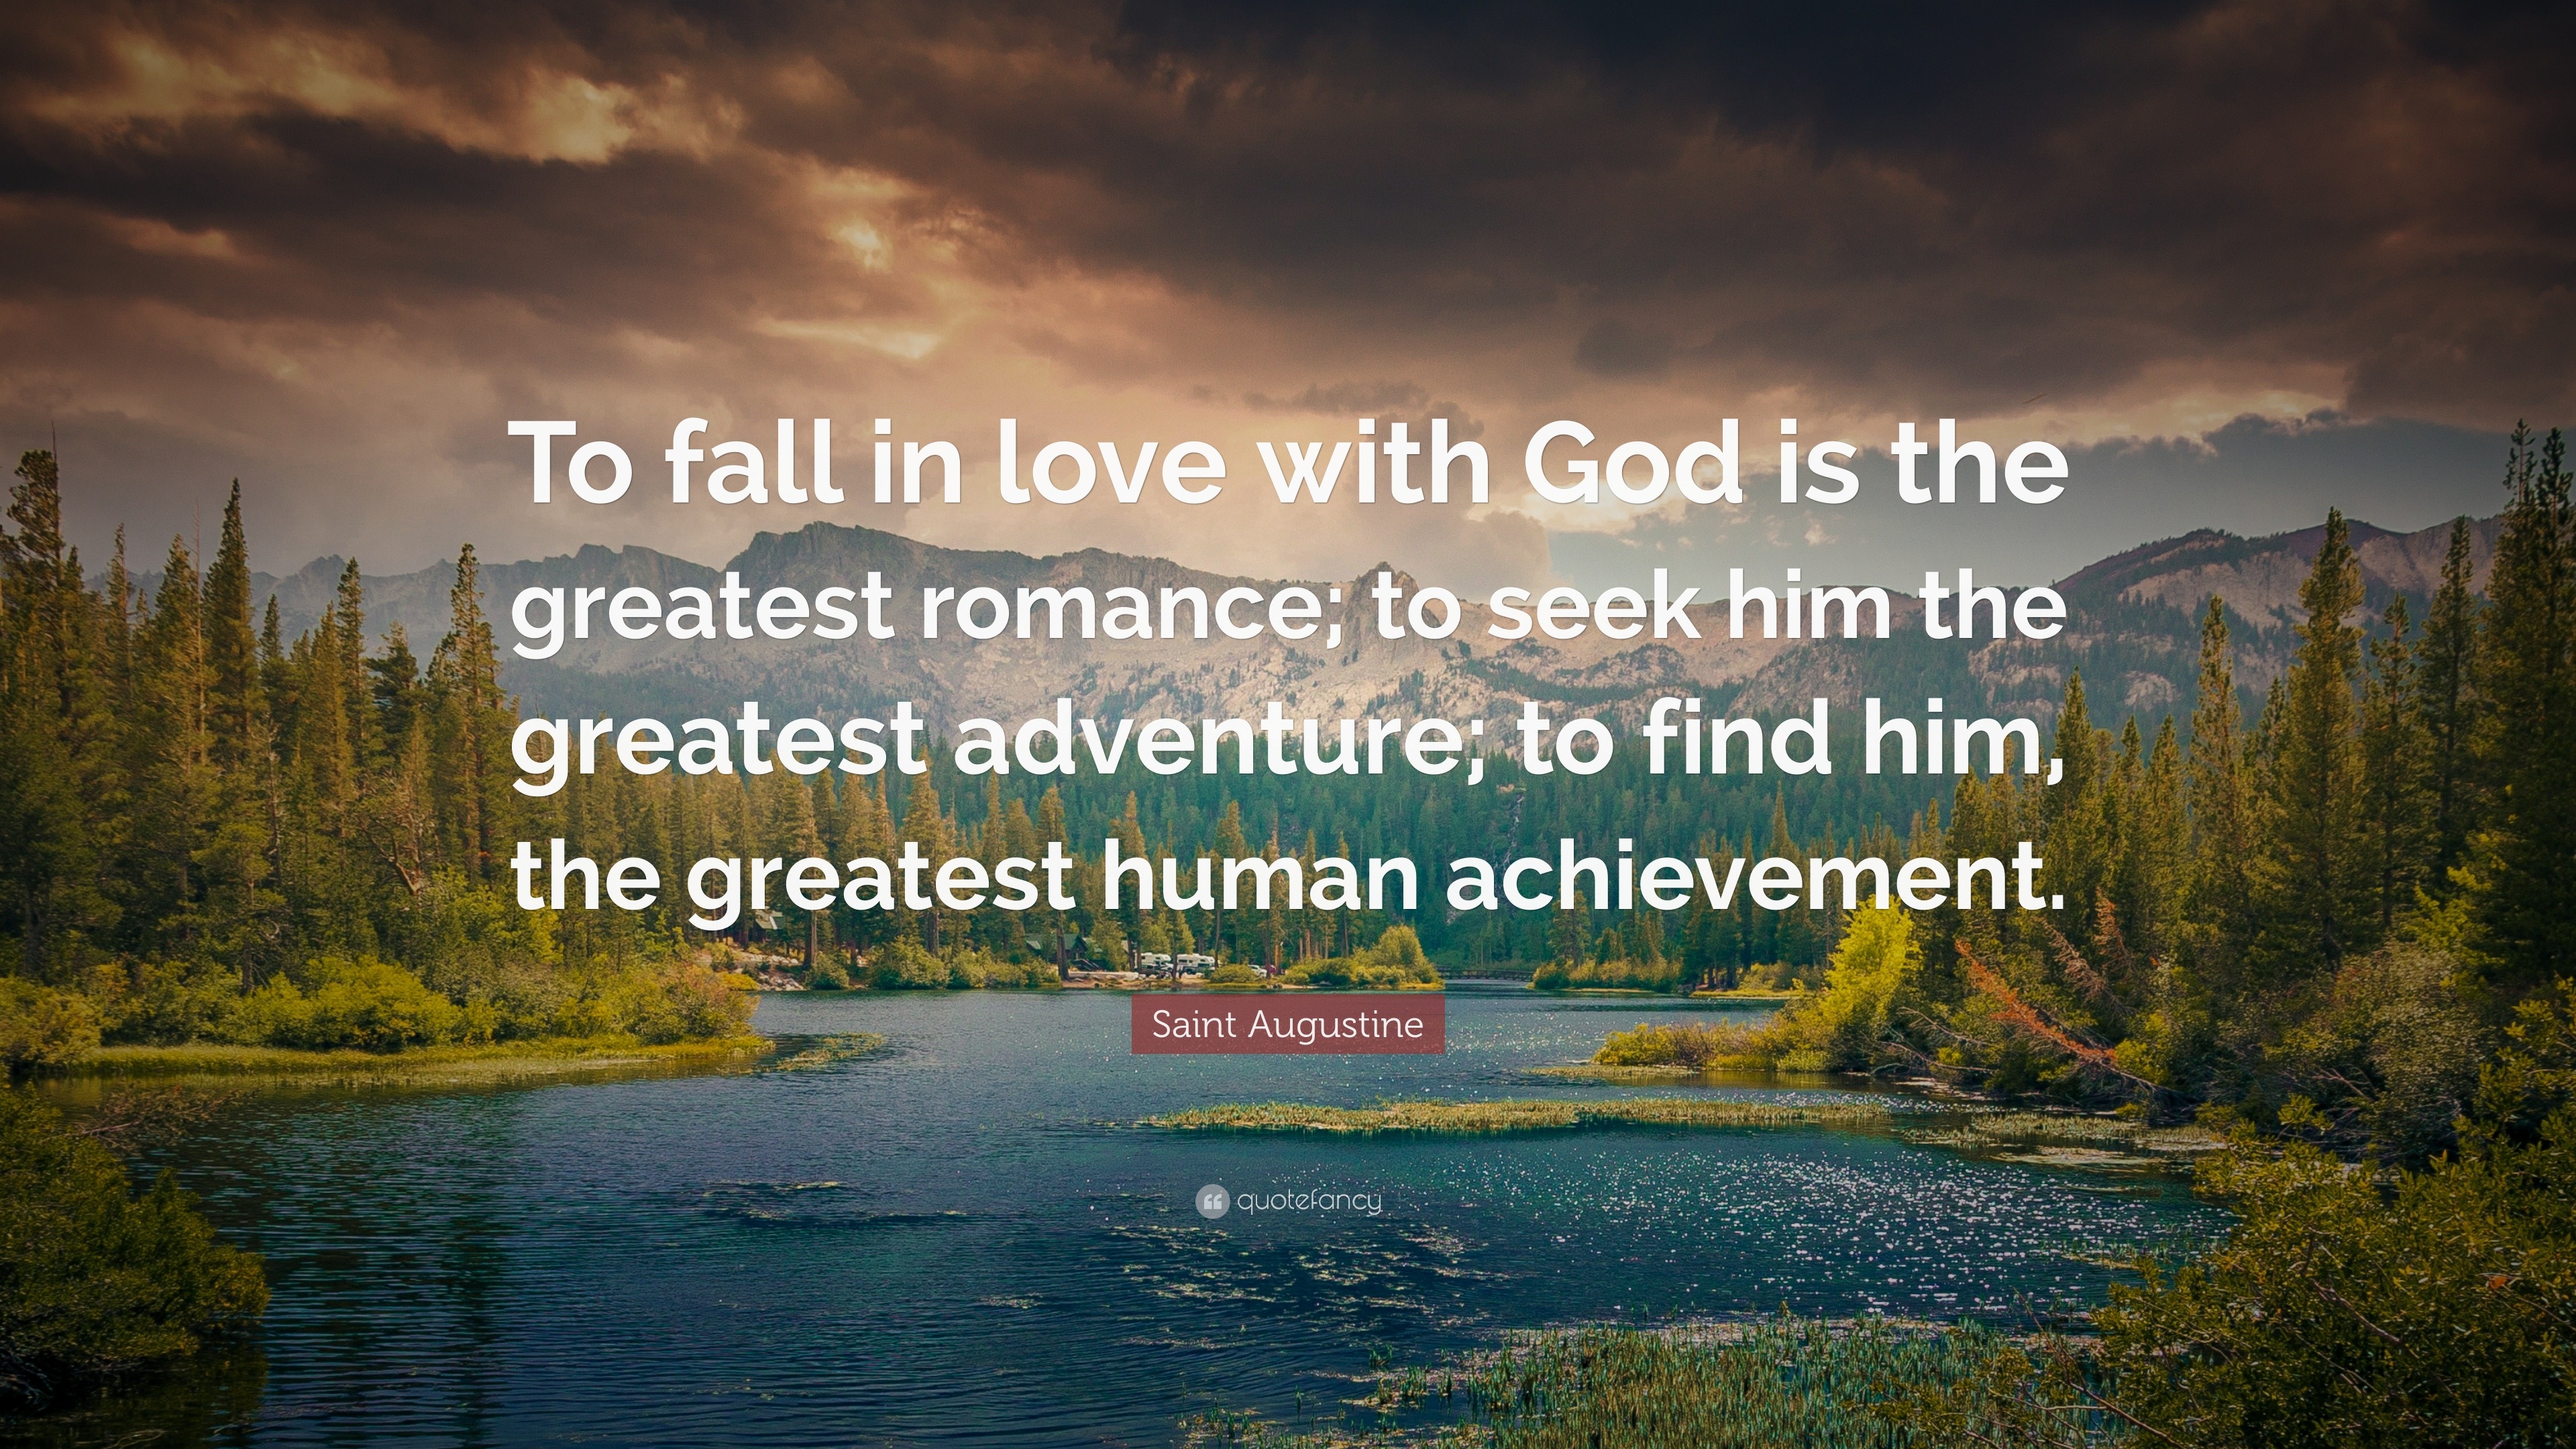 Saint Augustine Quote “To fall in love with God is the